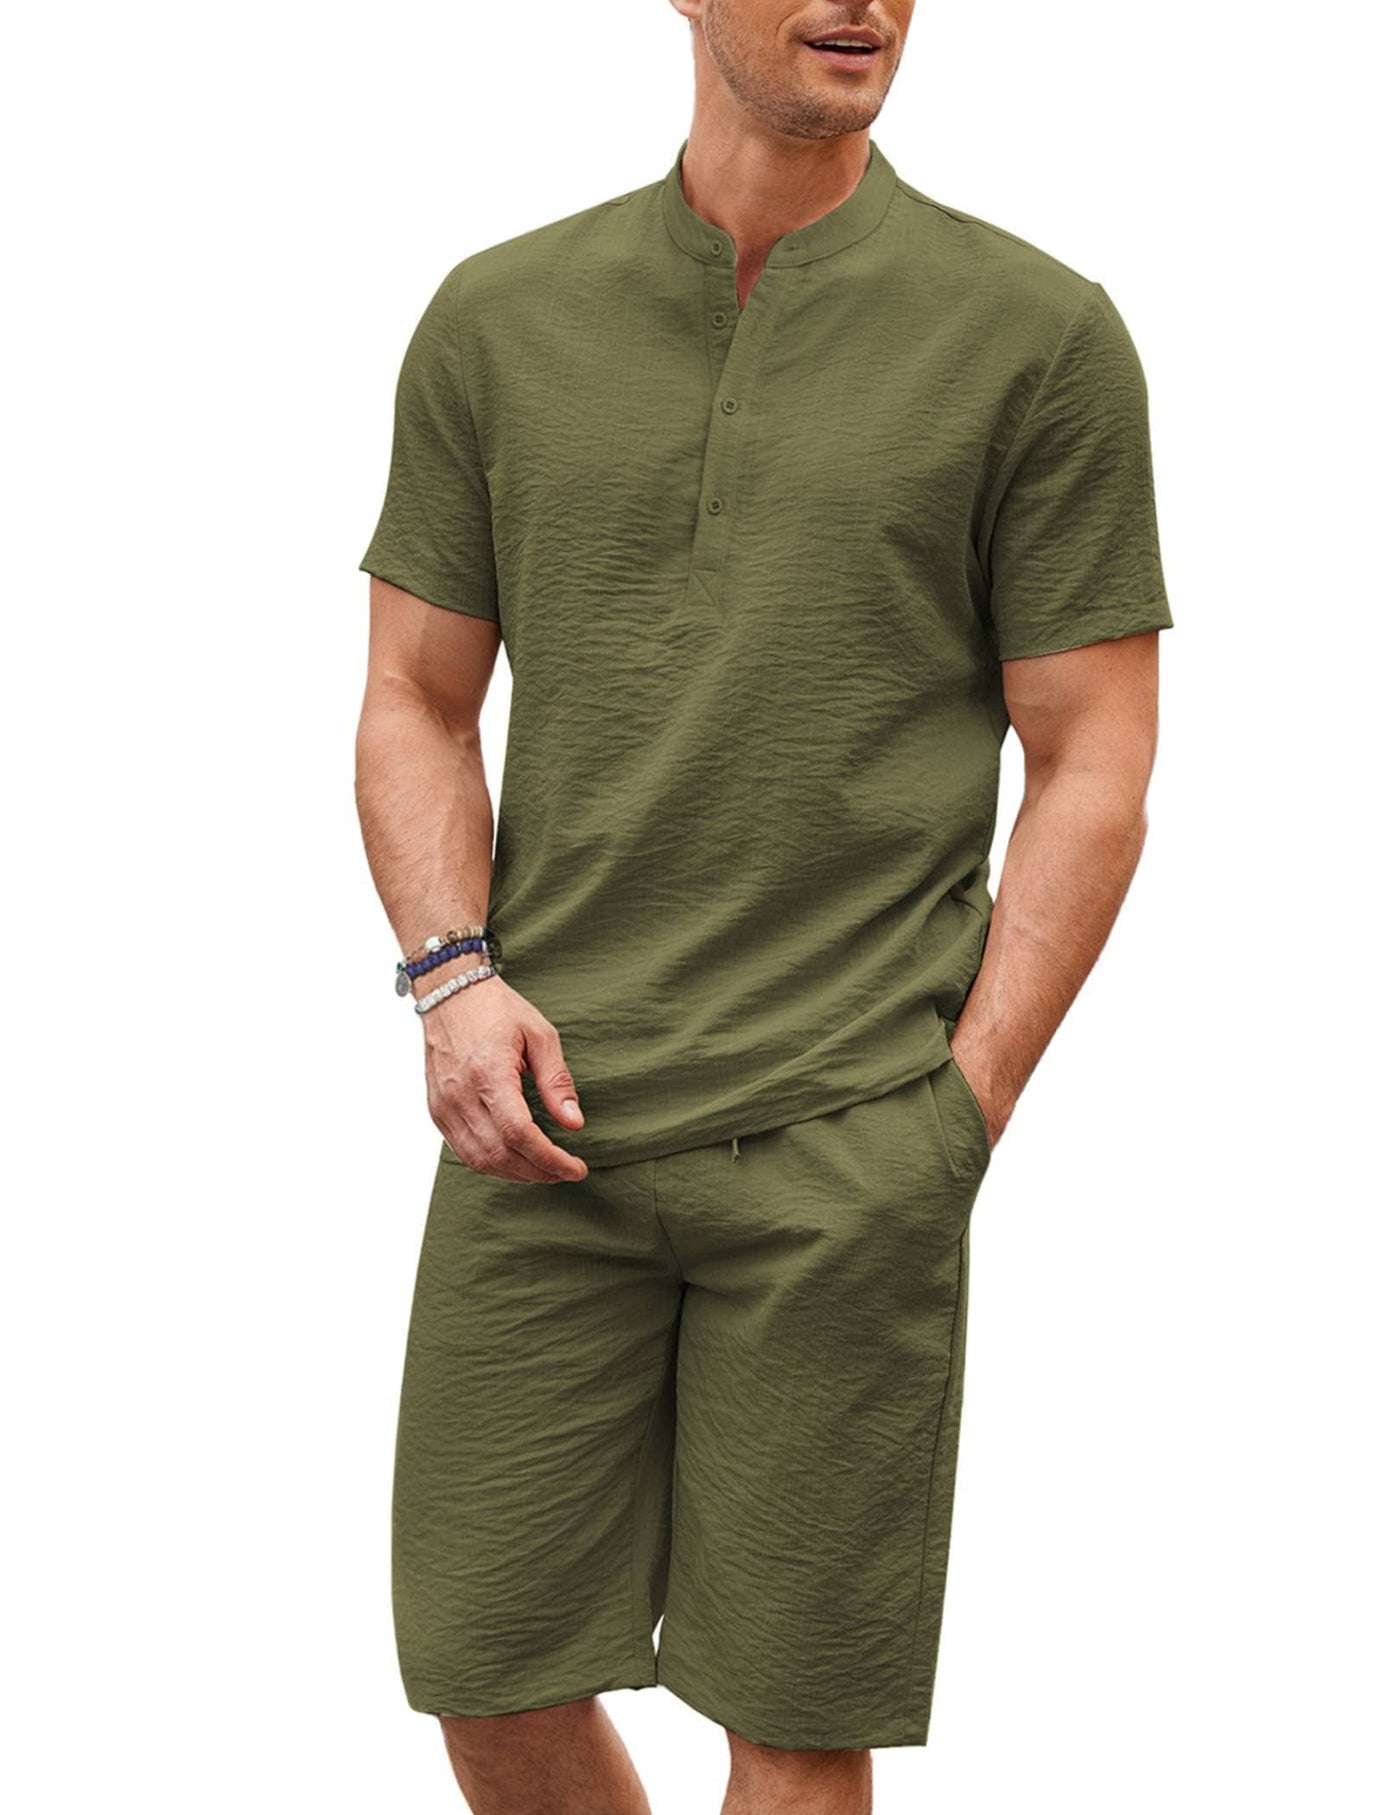 Casual 2 Pieces Cotton Linen Henley Shirt Set (US Only) Sets coofandy Army Green S 